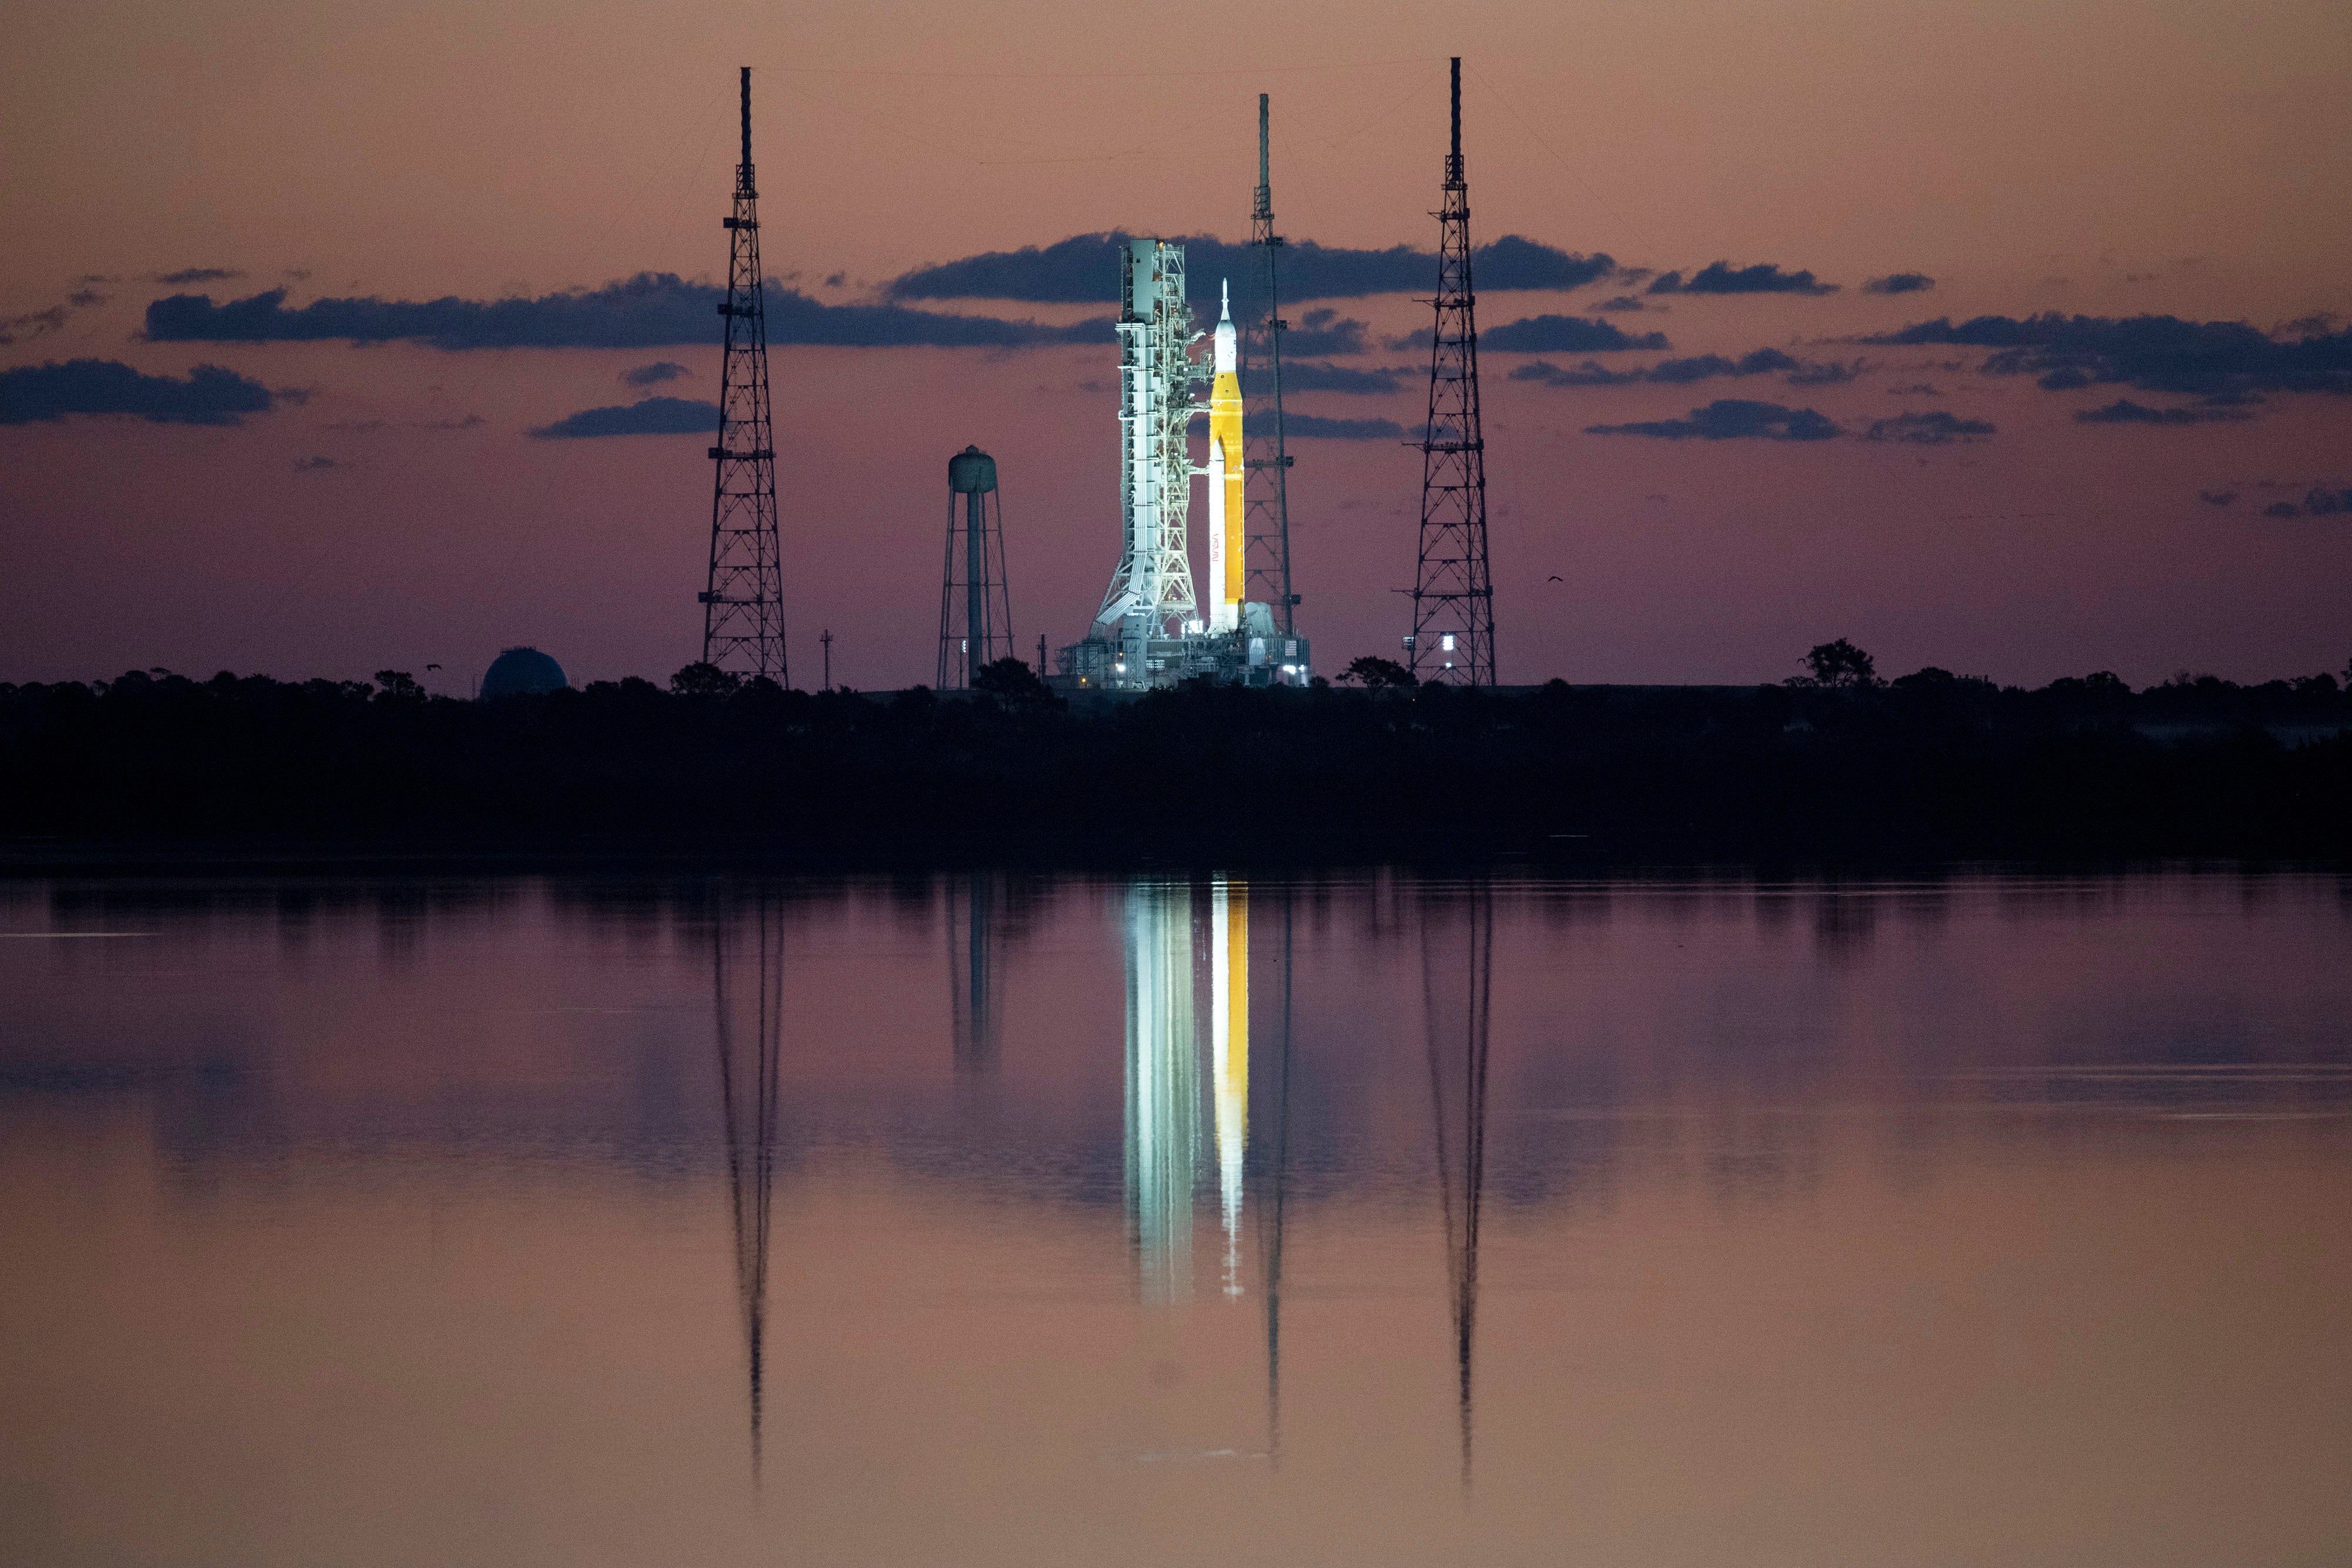 In this handout photo provided by NASA, NASA's Space Launch System (SLS) rocket with the Orion spacecraft aboard is seen at sunrise atop a mobile launcher at Launch Complex 39B on April 4, 2022 at the Kennedy Space Center in Cape Canaveral, Florida